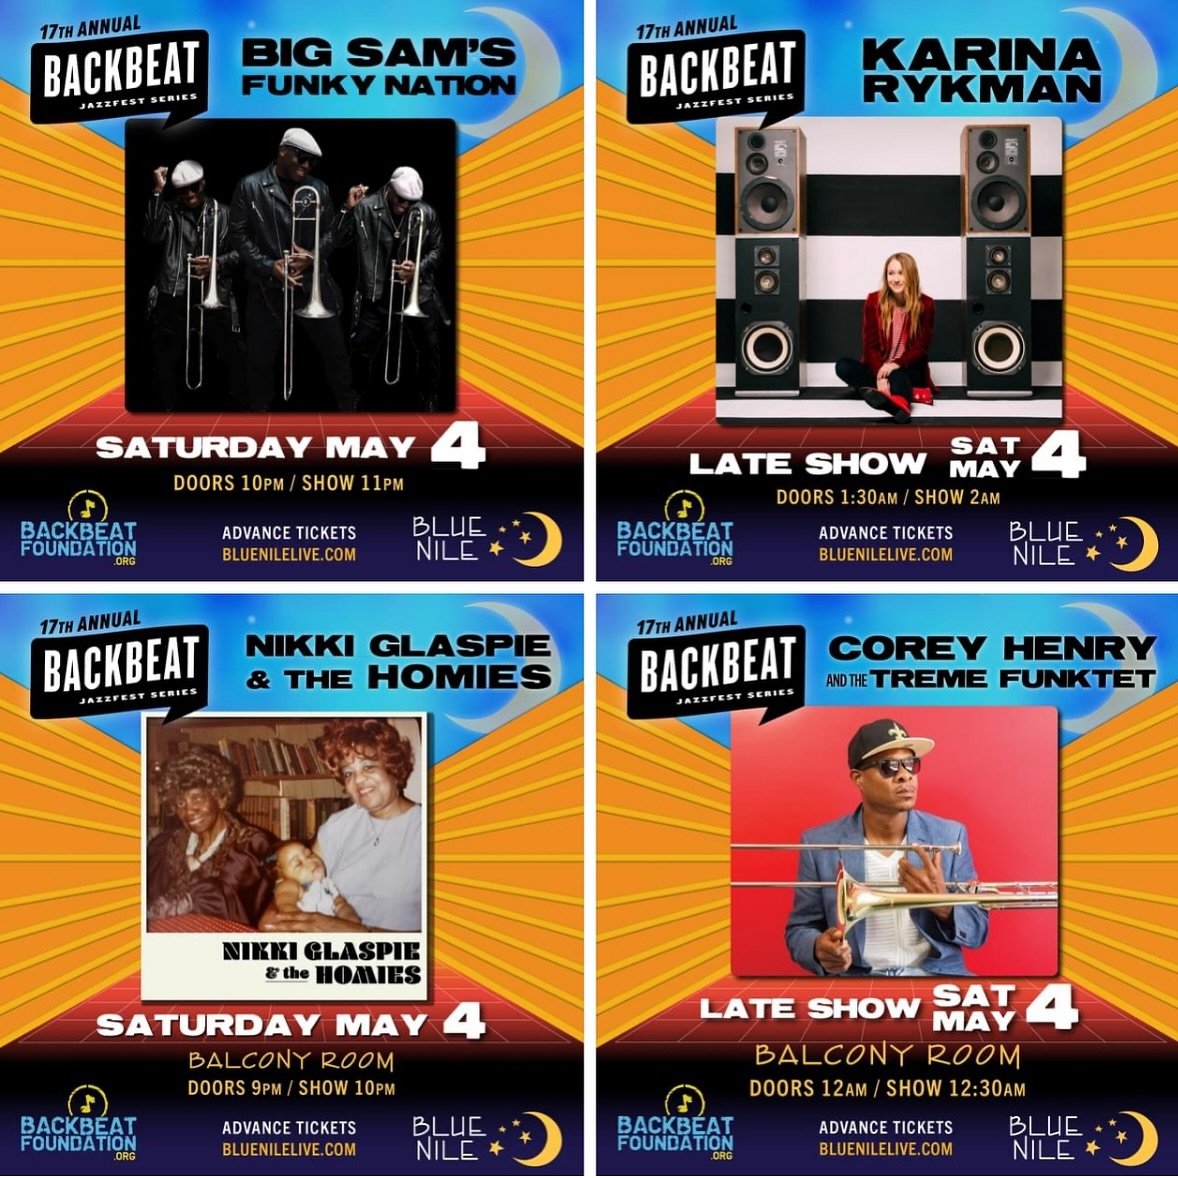 TONIGHT! ✨🌙 
17th Annual Backbeat JazzFest Series presents Big Sam&rsquo;s Funky Nation, Karina Rykman, Nikki Glaspie &amp; the Homies, Corey Henry and the Treme Funktet!
Advance Tickets (while they last) bluenilelive.com

George Brown Band 7PM, Fre